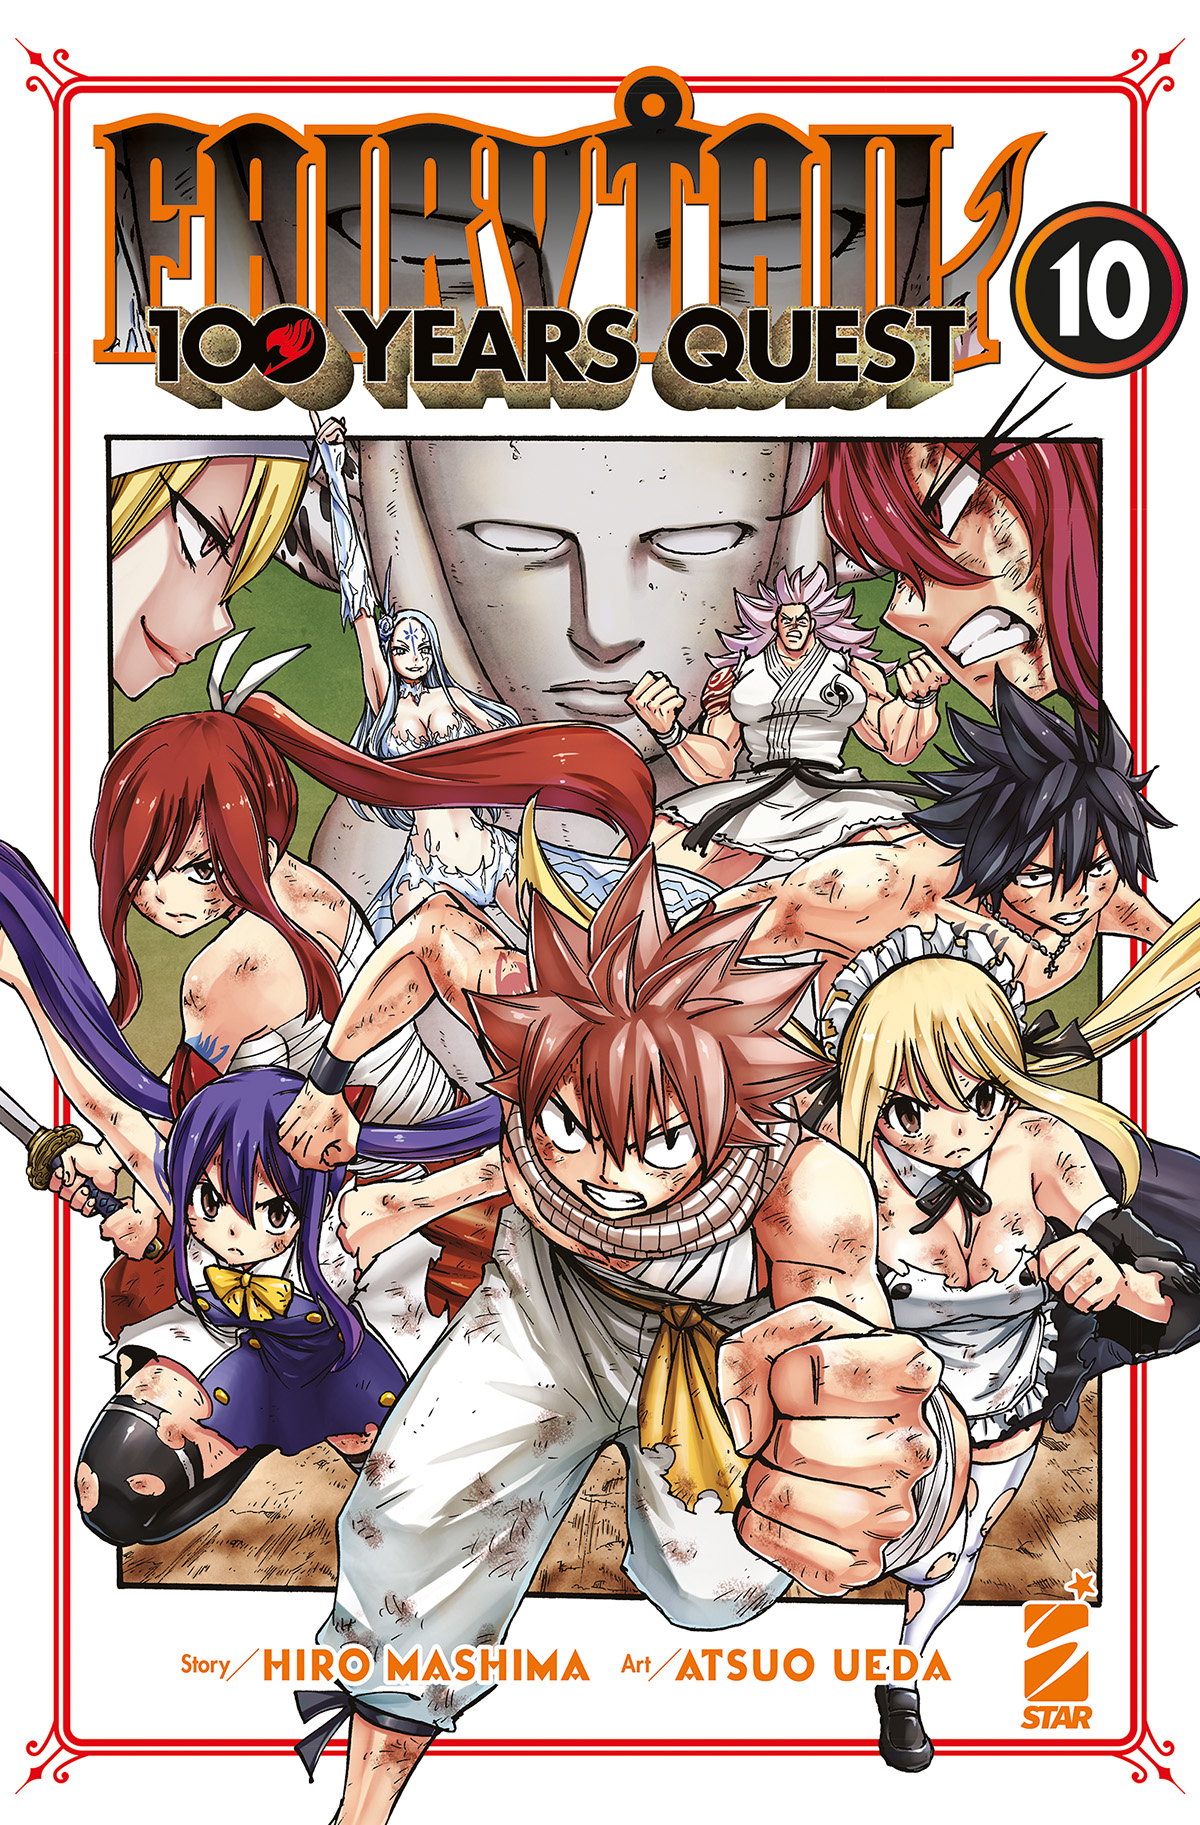 YOUNG #334 FAIRY TAIL 100 YEARS QUEST N.10